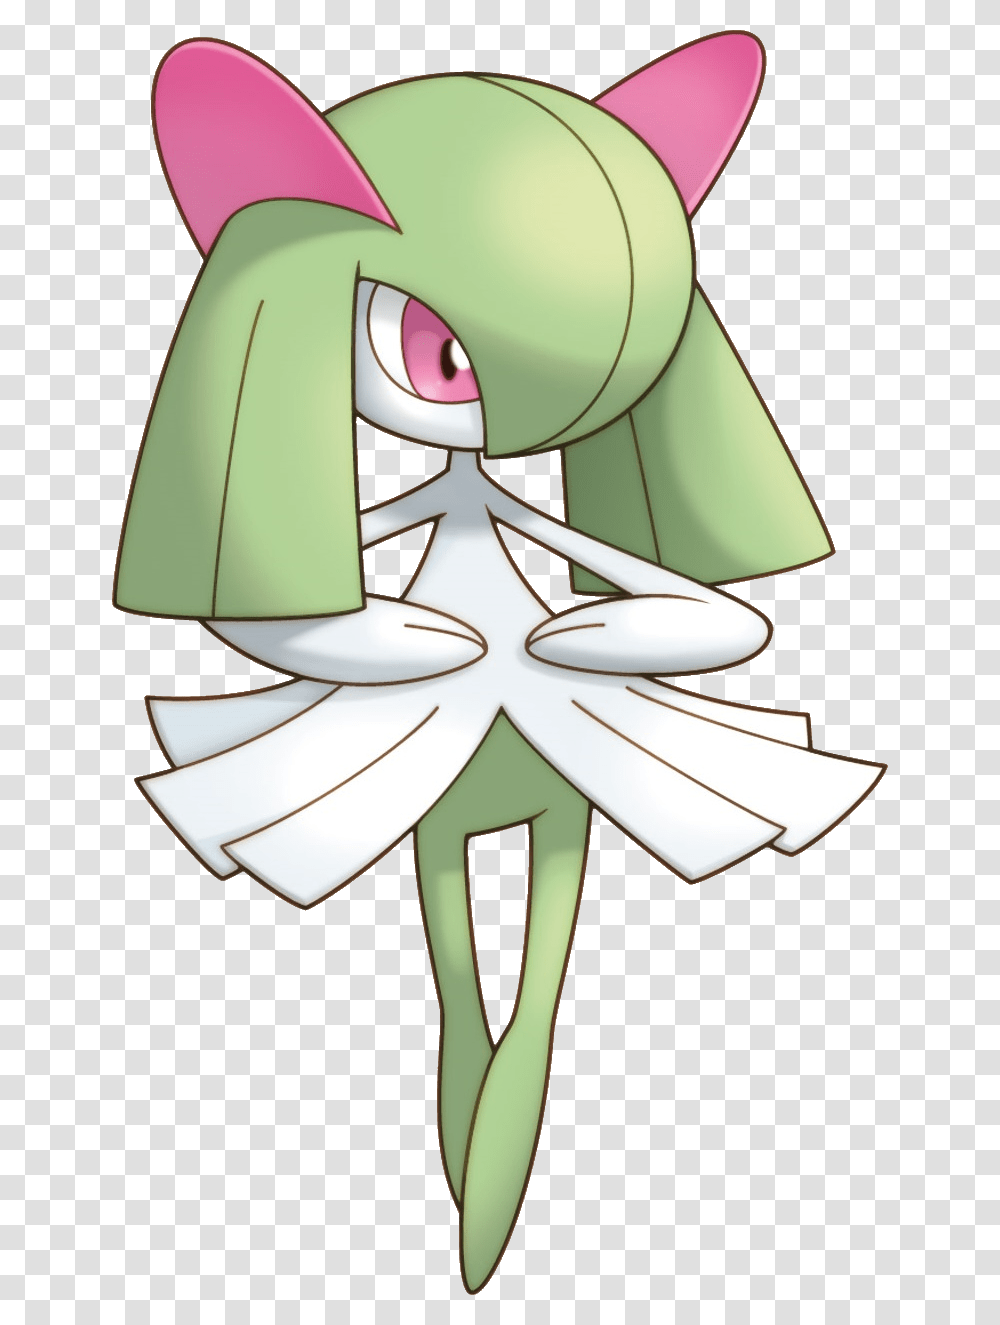 Ralts Pokemon Mystery Dungeon Kirlia, Lamp, Face, Costume Transparent Png